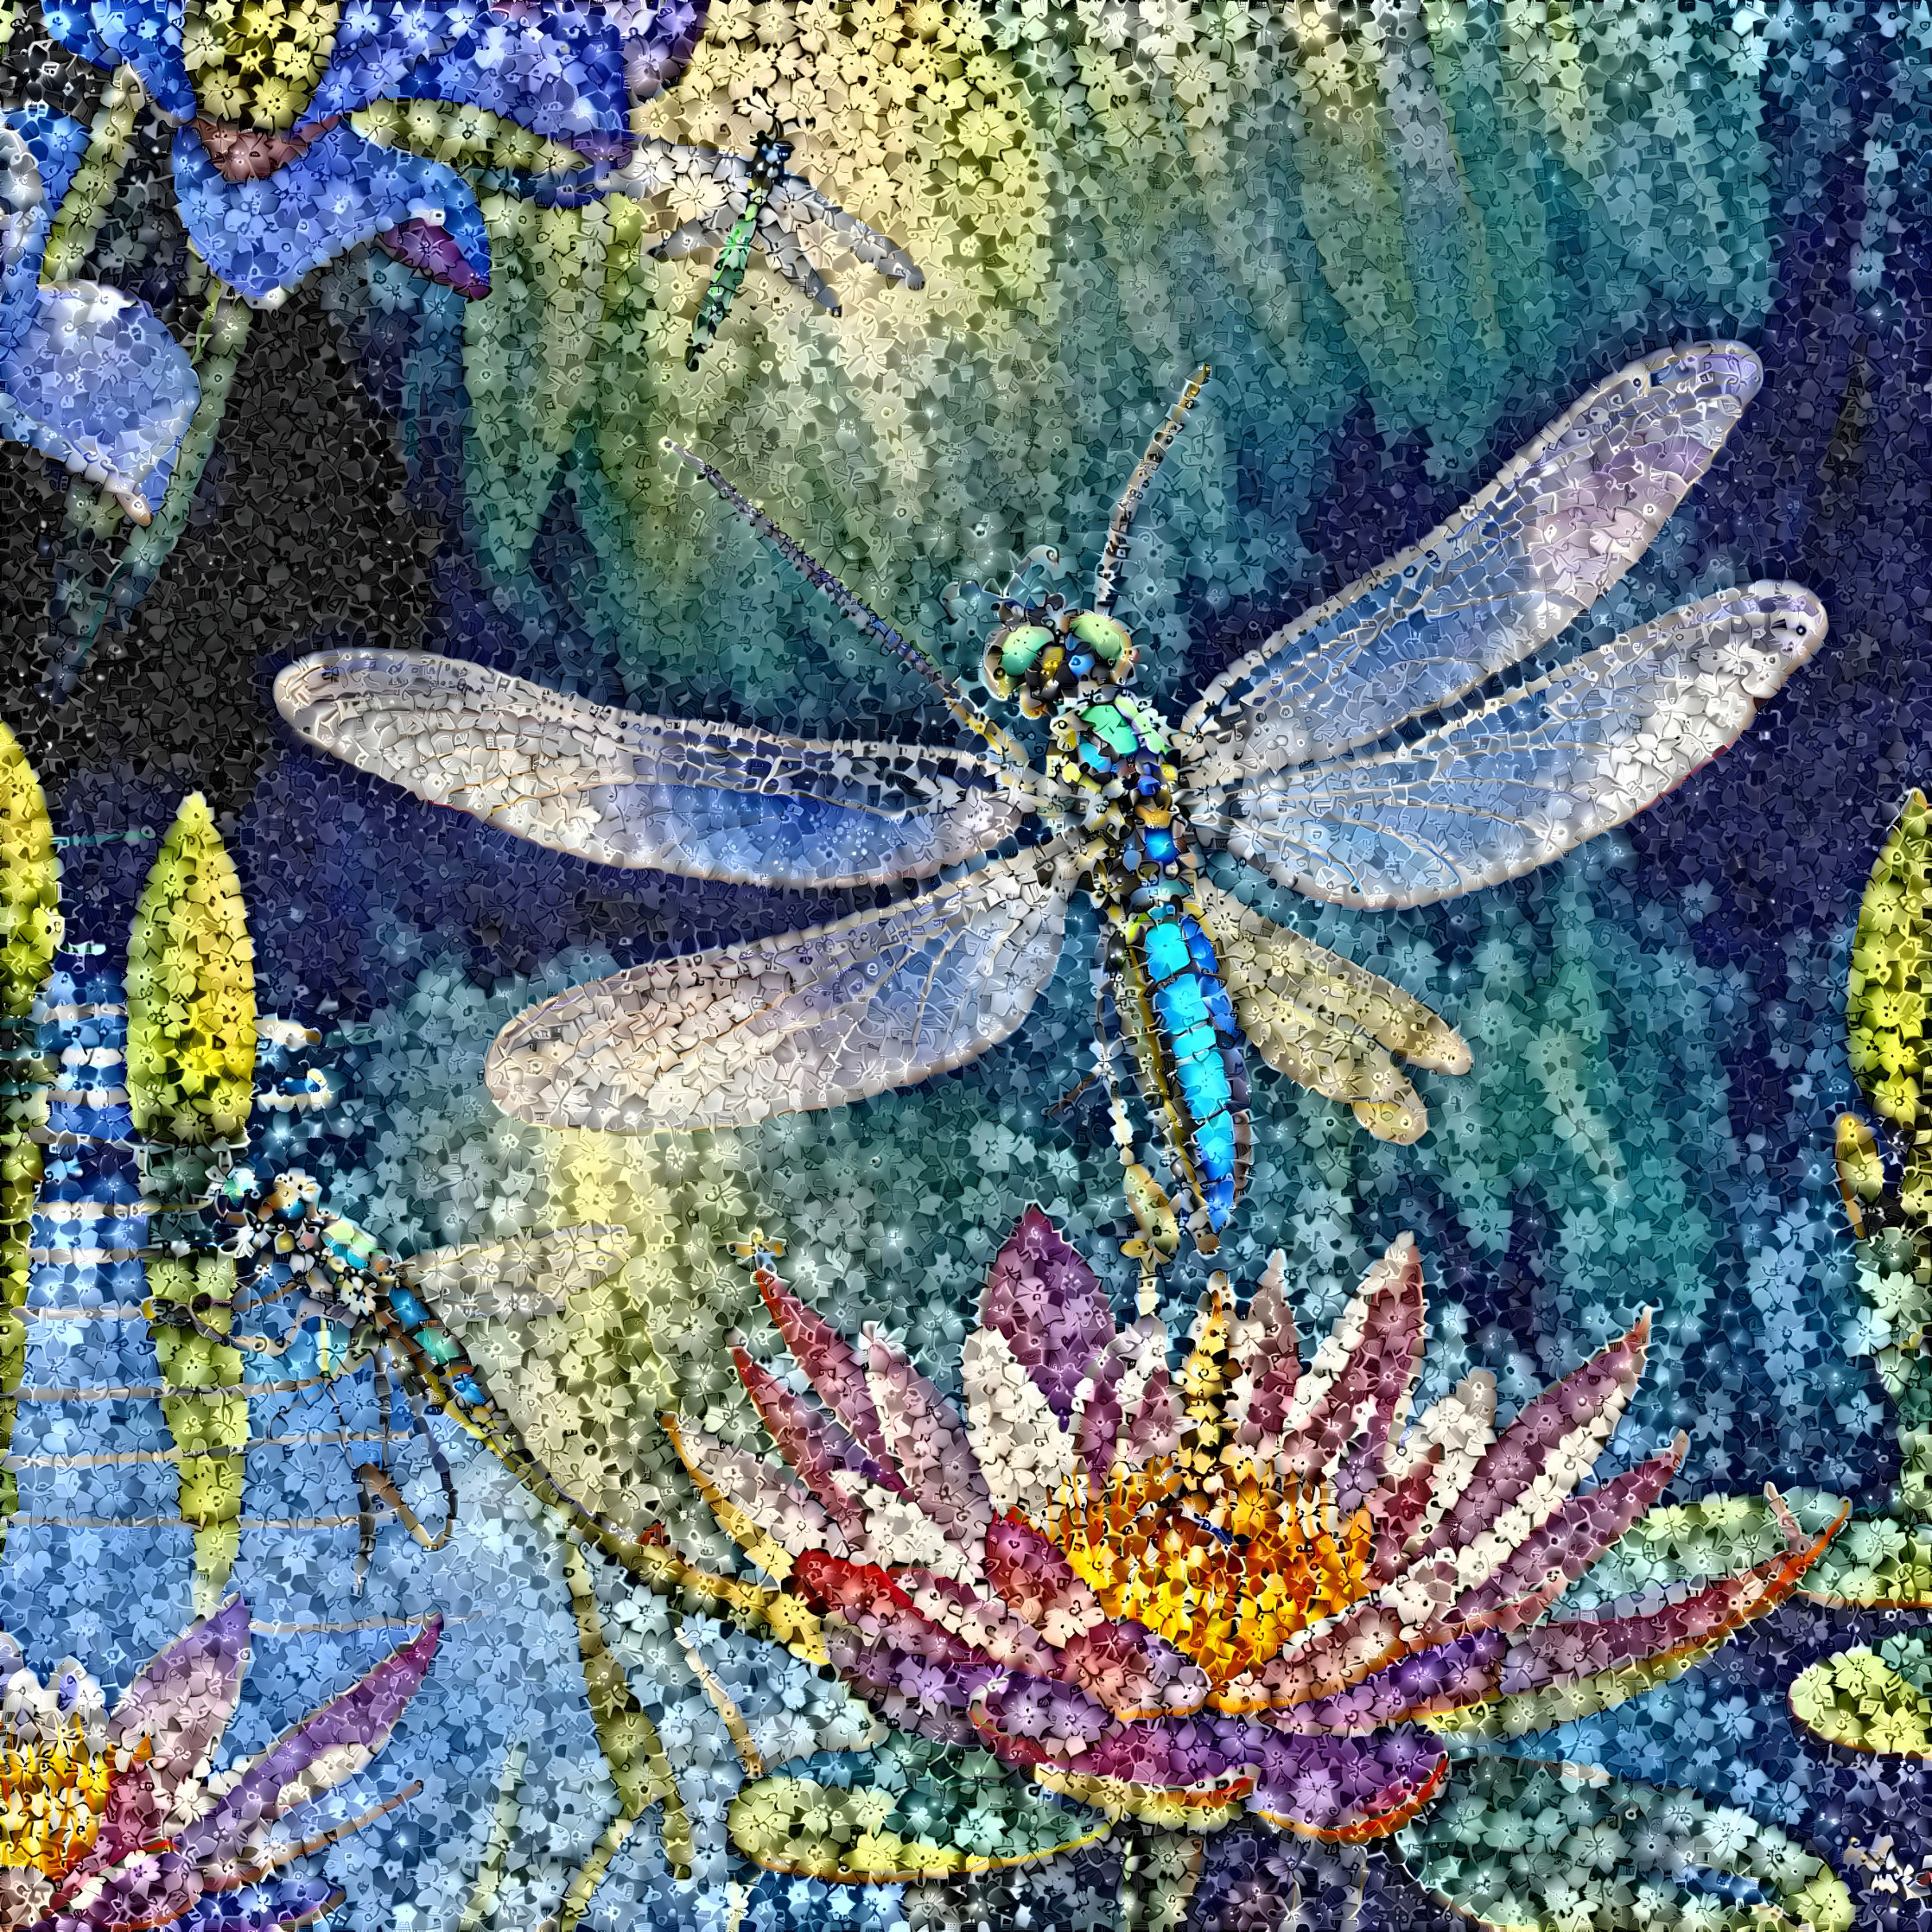 A puzzle painting of a dragonfly.